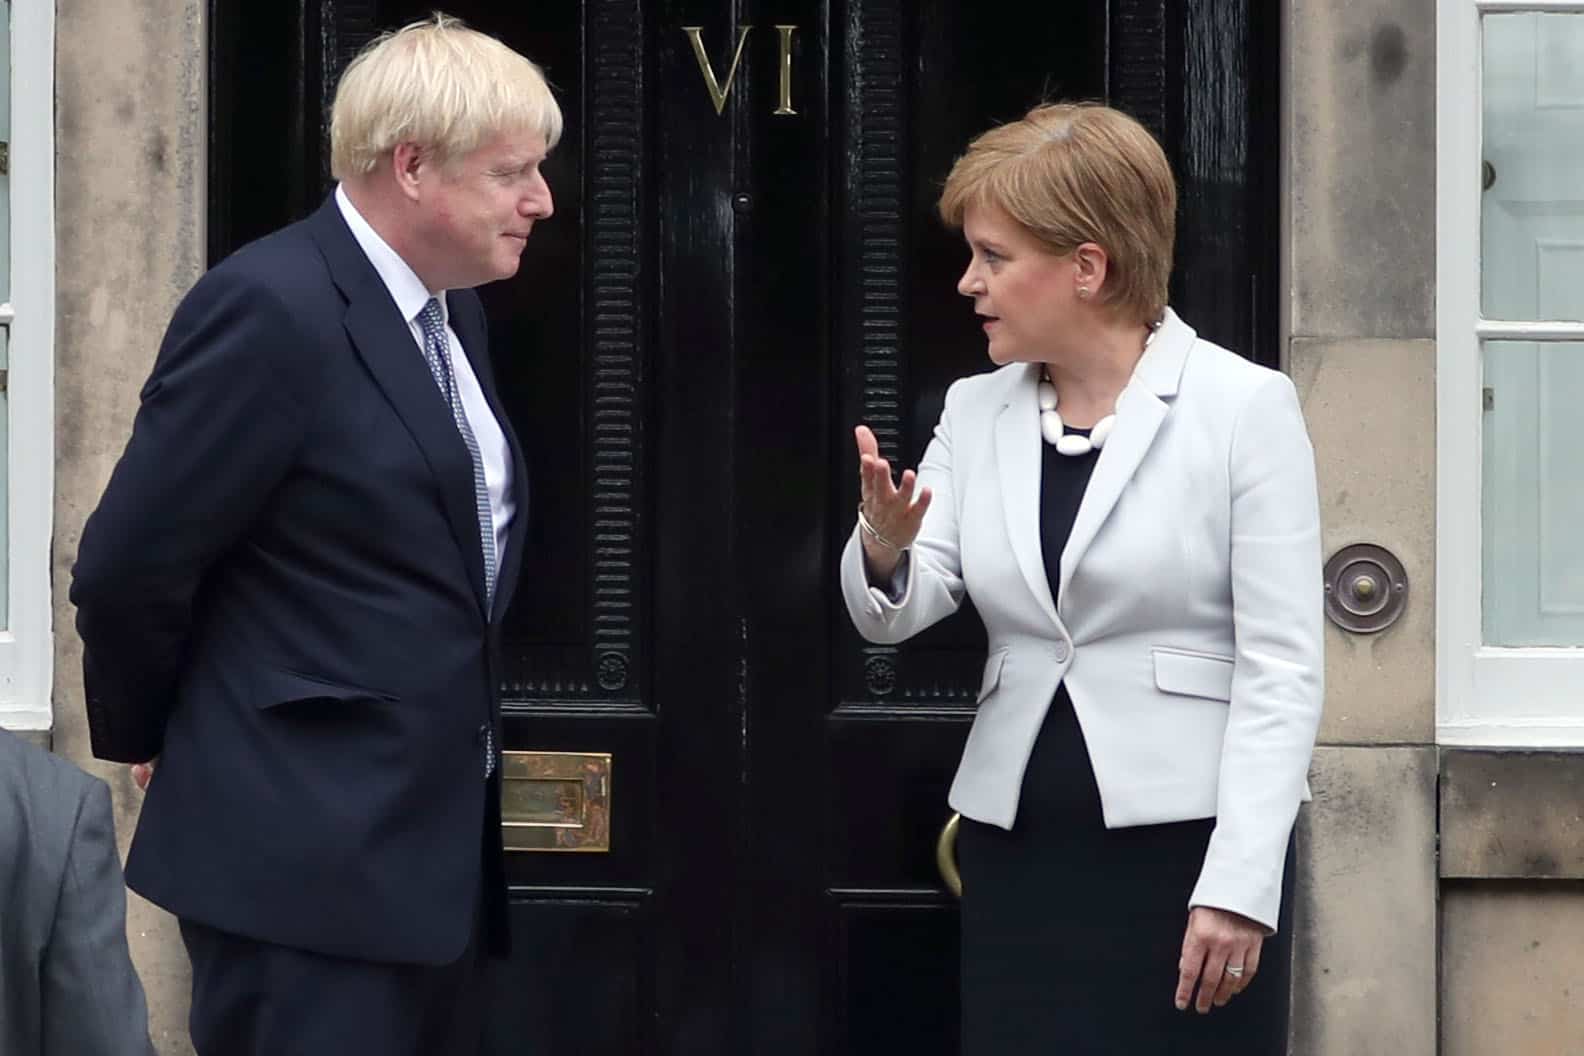 Sturgeon vows to hold indyref2 if SNP wins in May – whether Boris likes it or not